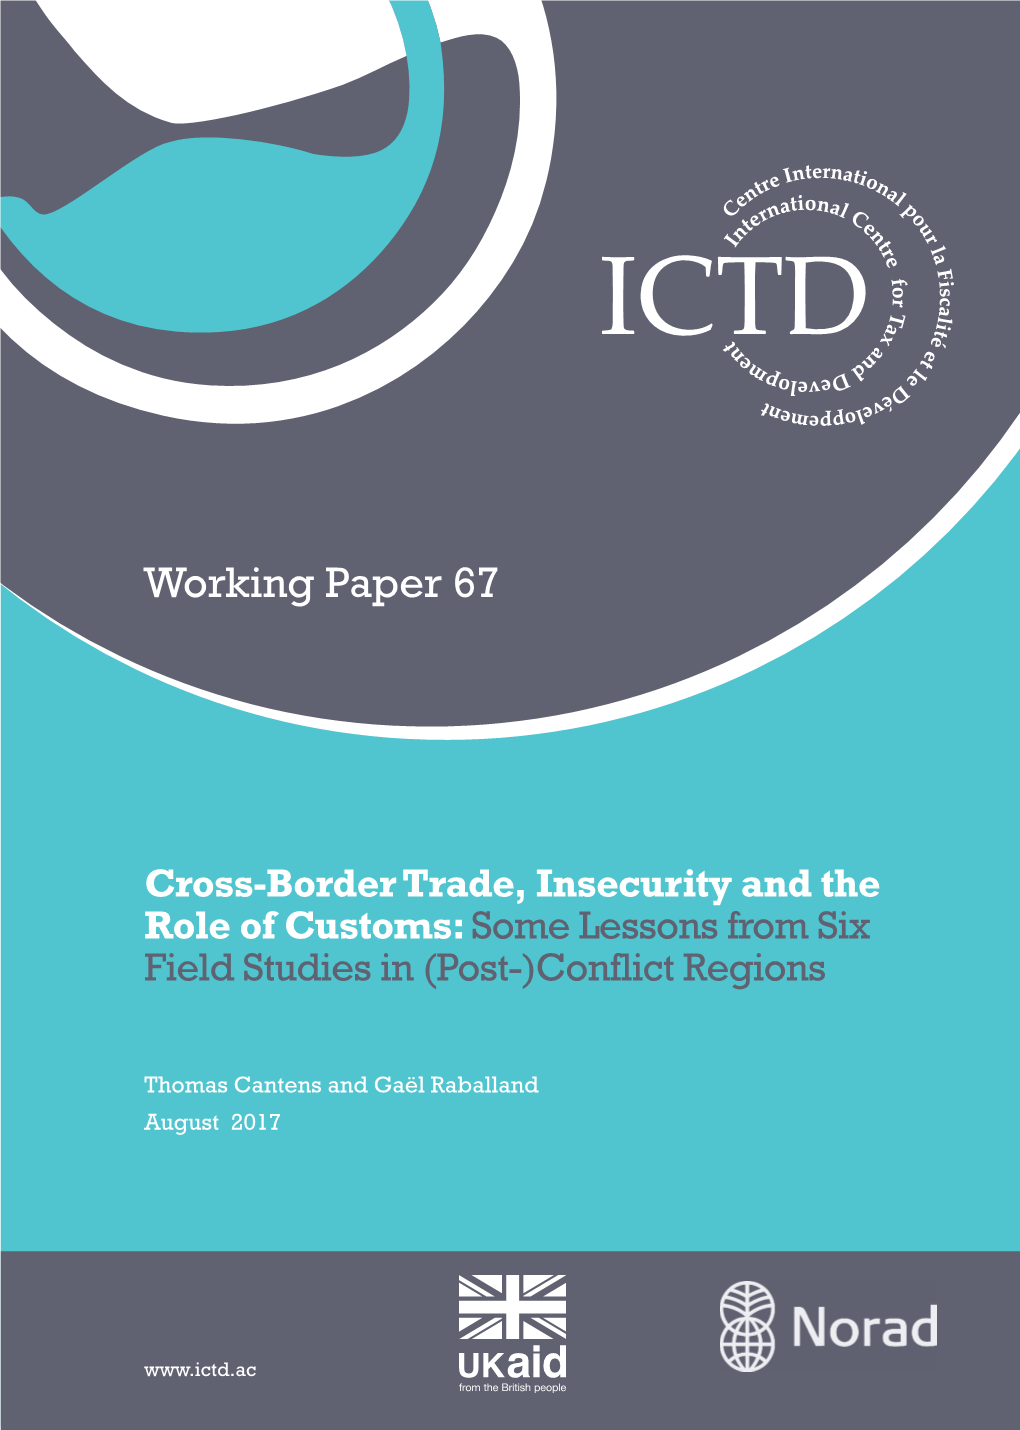 Cross-Border Trade, Insecurity and the Role of Customs: Some Lessons from Six Field Studies in (Post-)Conflict Regions